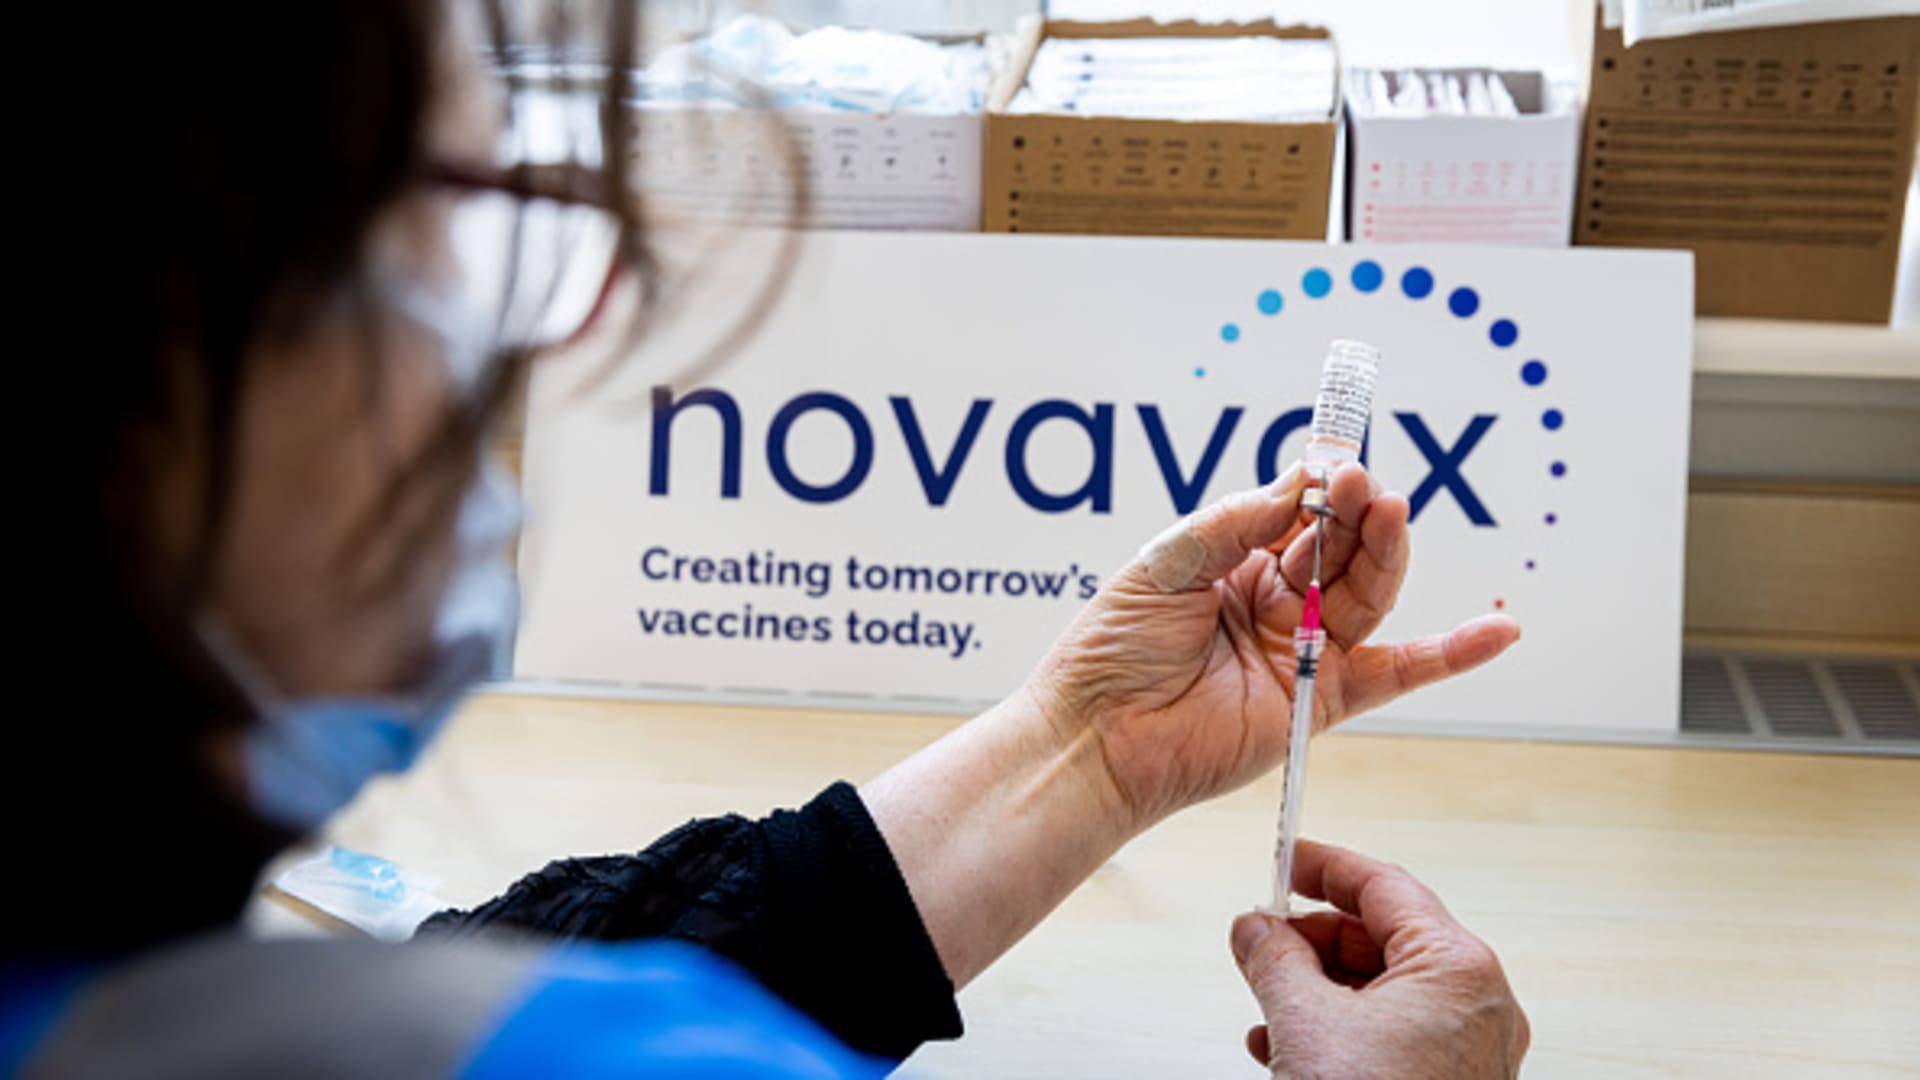 Novavax says vaccine targeting Covid and flu shows promising results in early data